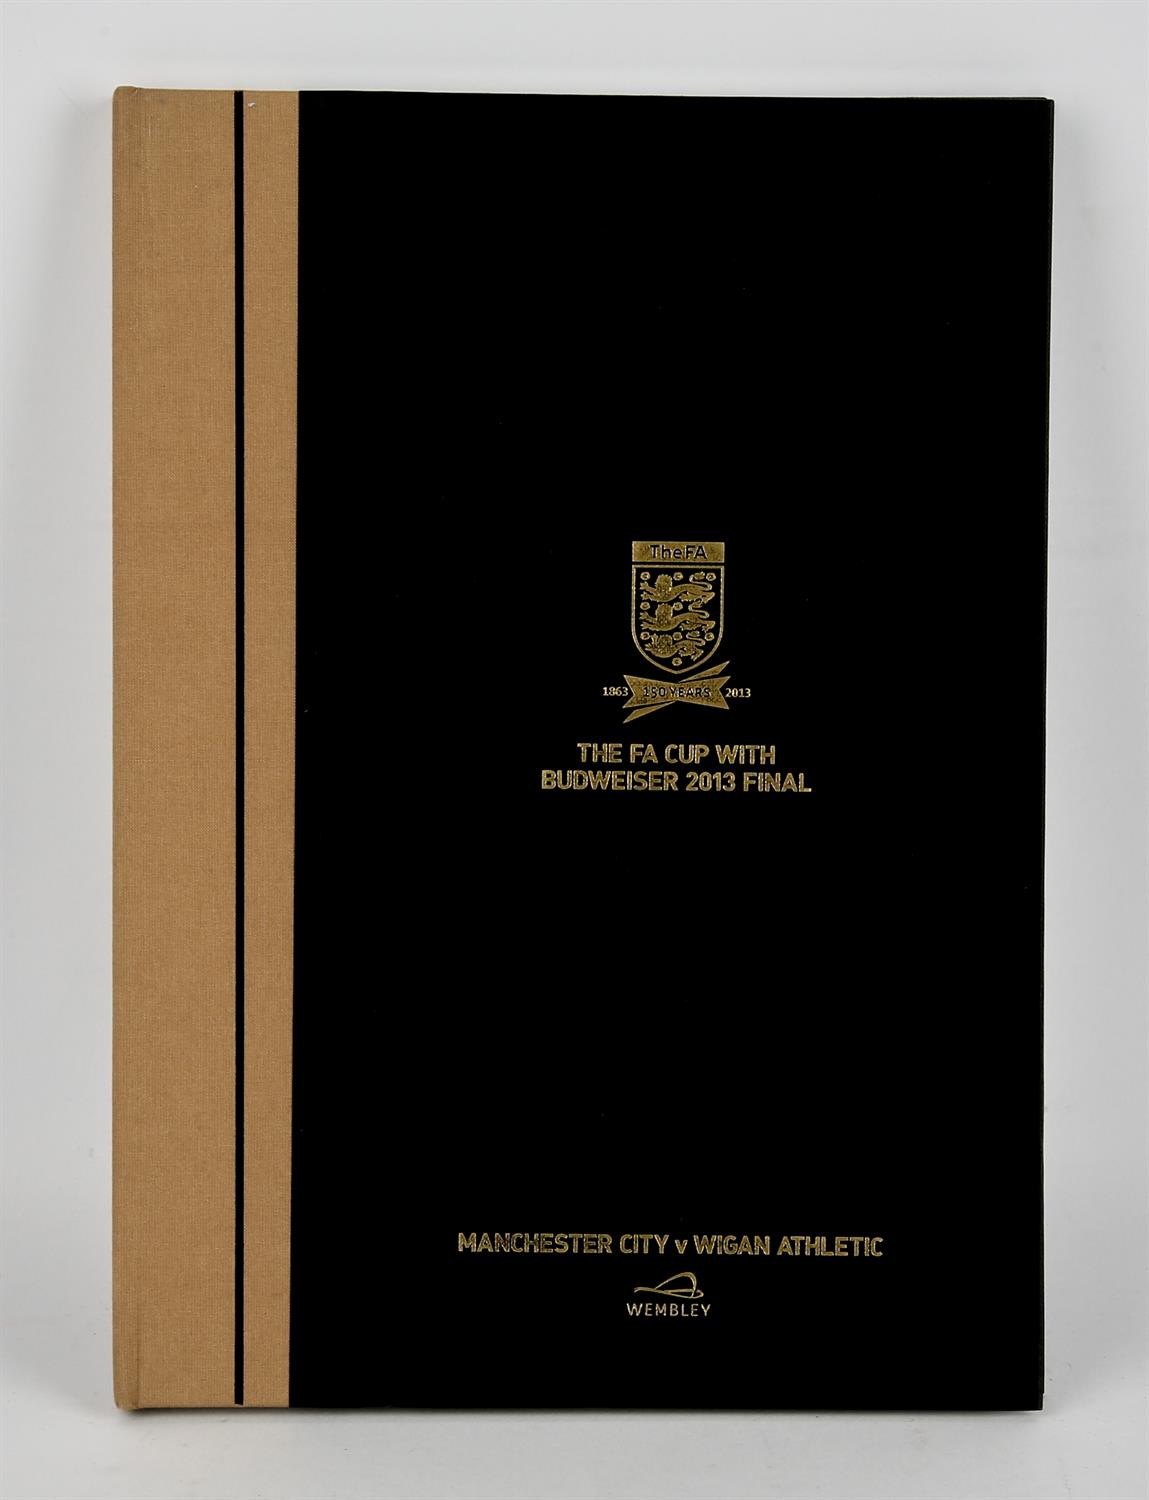 150 years of the FA - Special FA Cup with Budweiser 2013 Final Book - Manchester City v Wigan